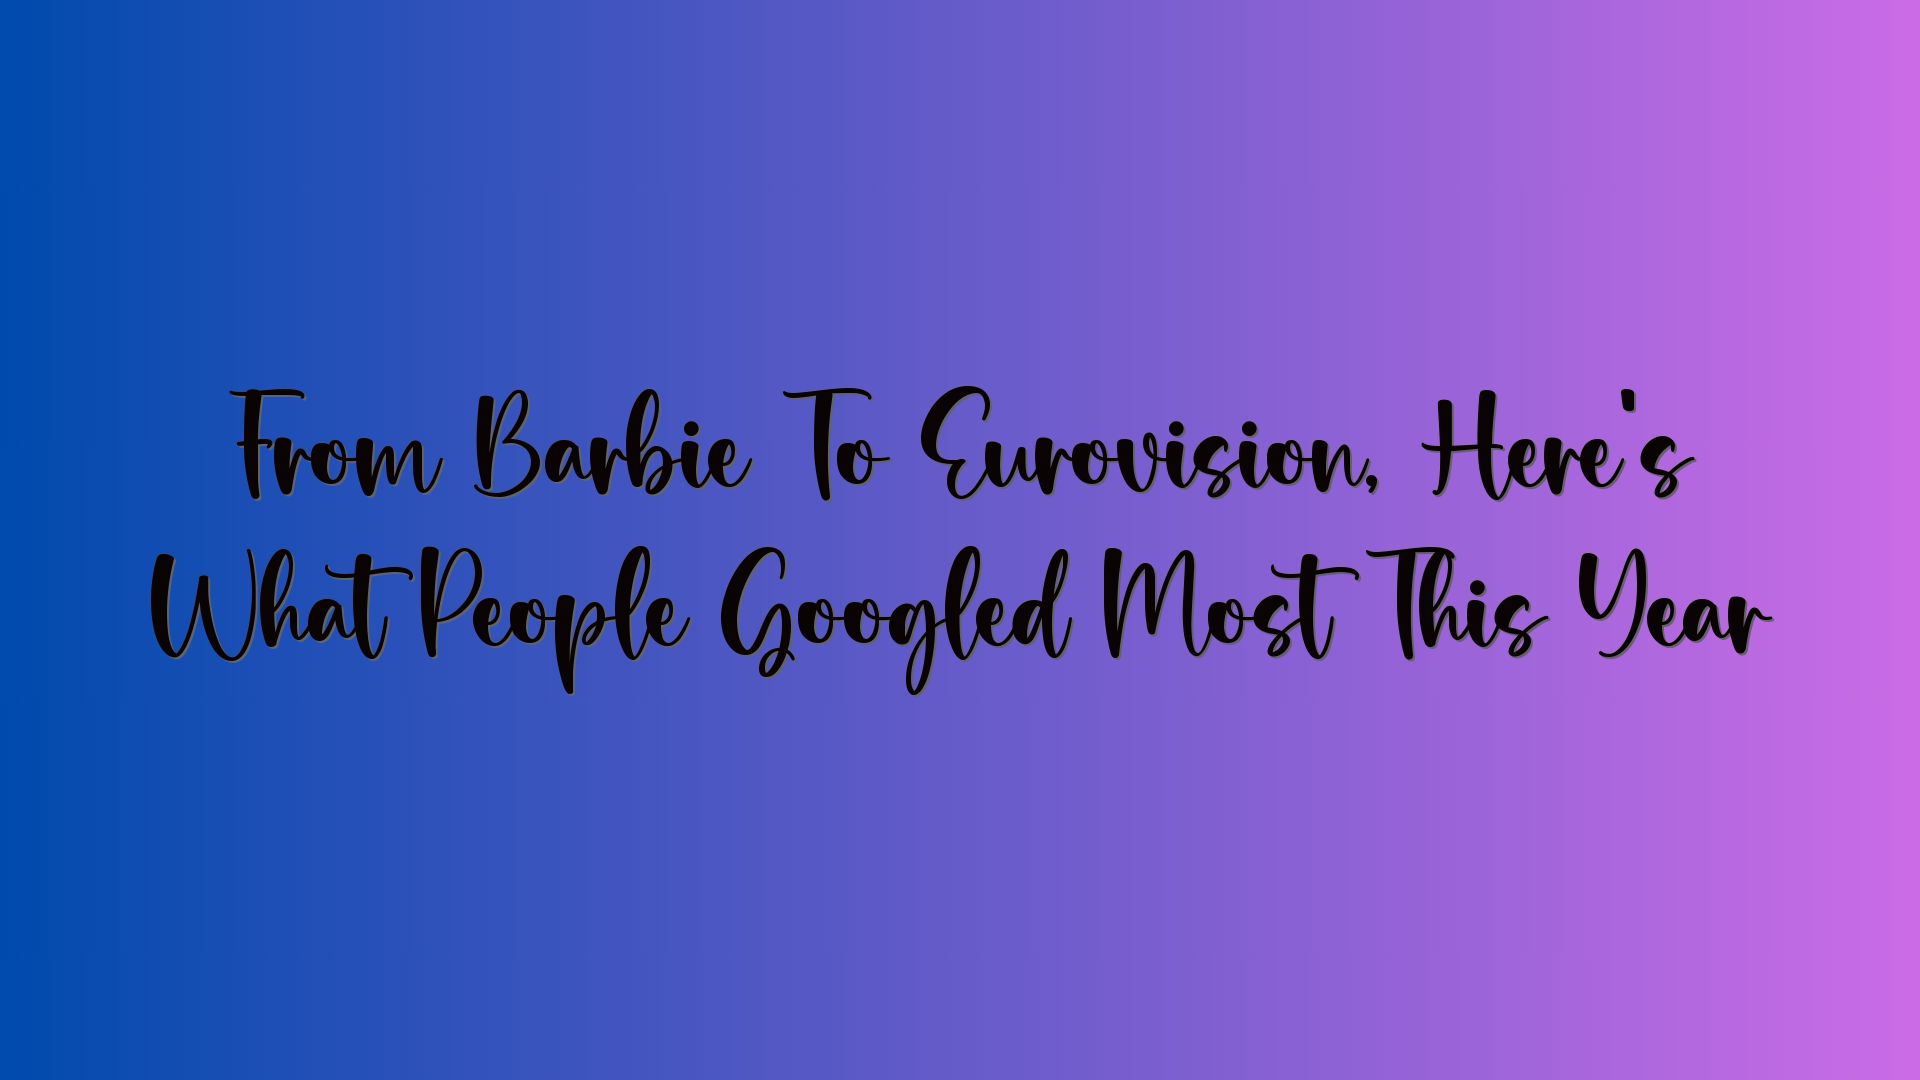 From Barbie To Eurovision, Here’s What People Googled Most This Year